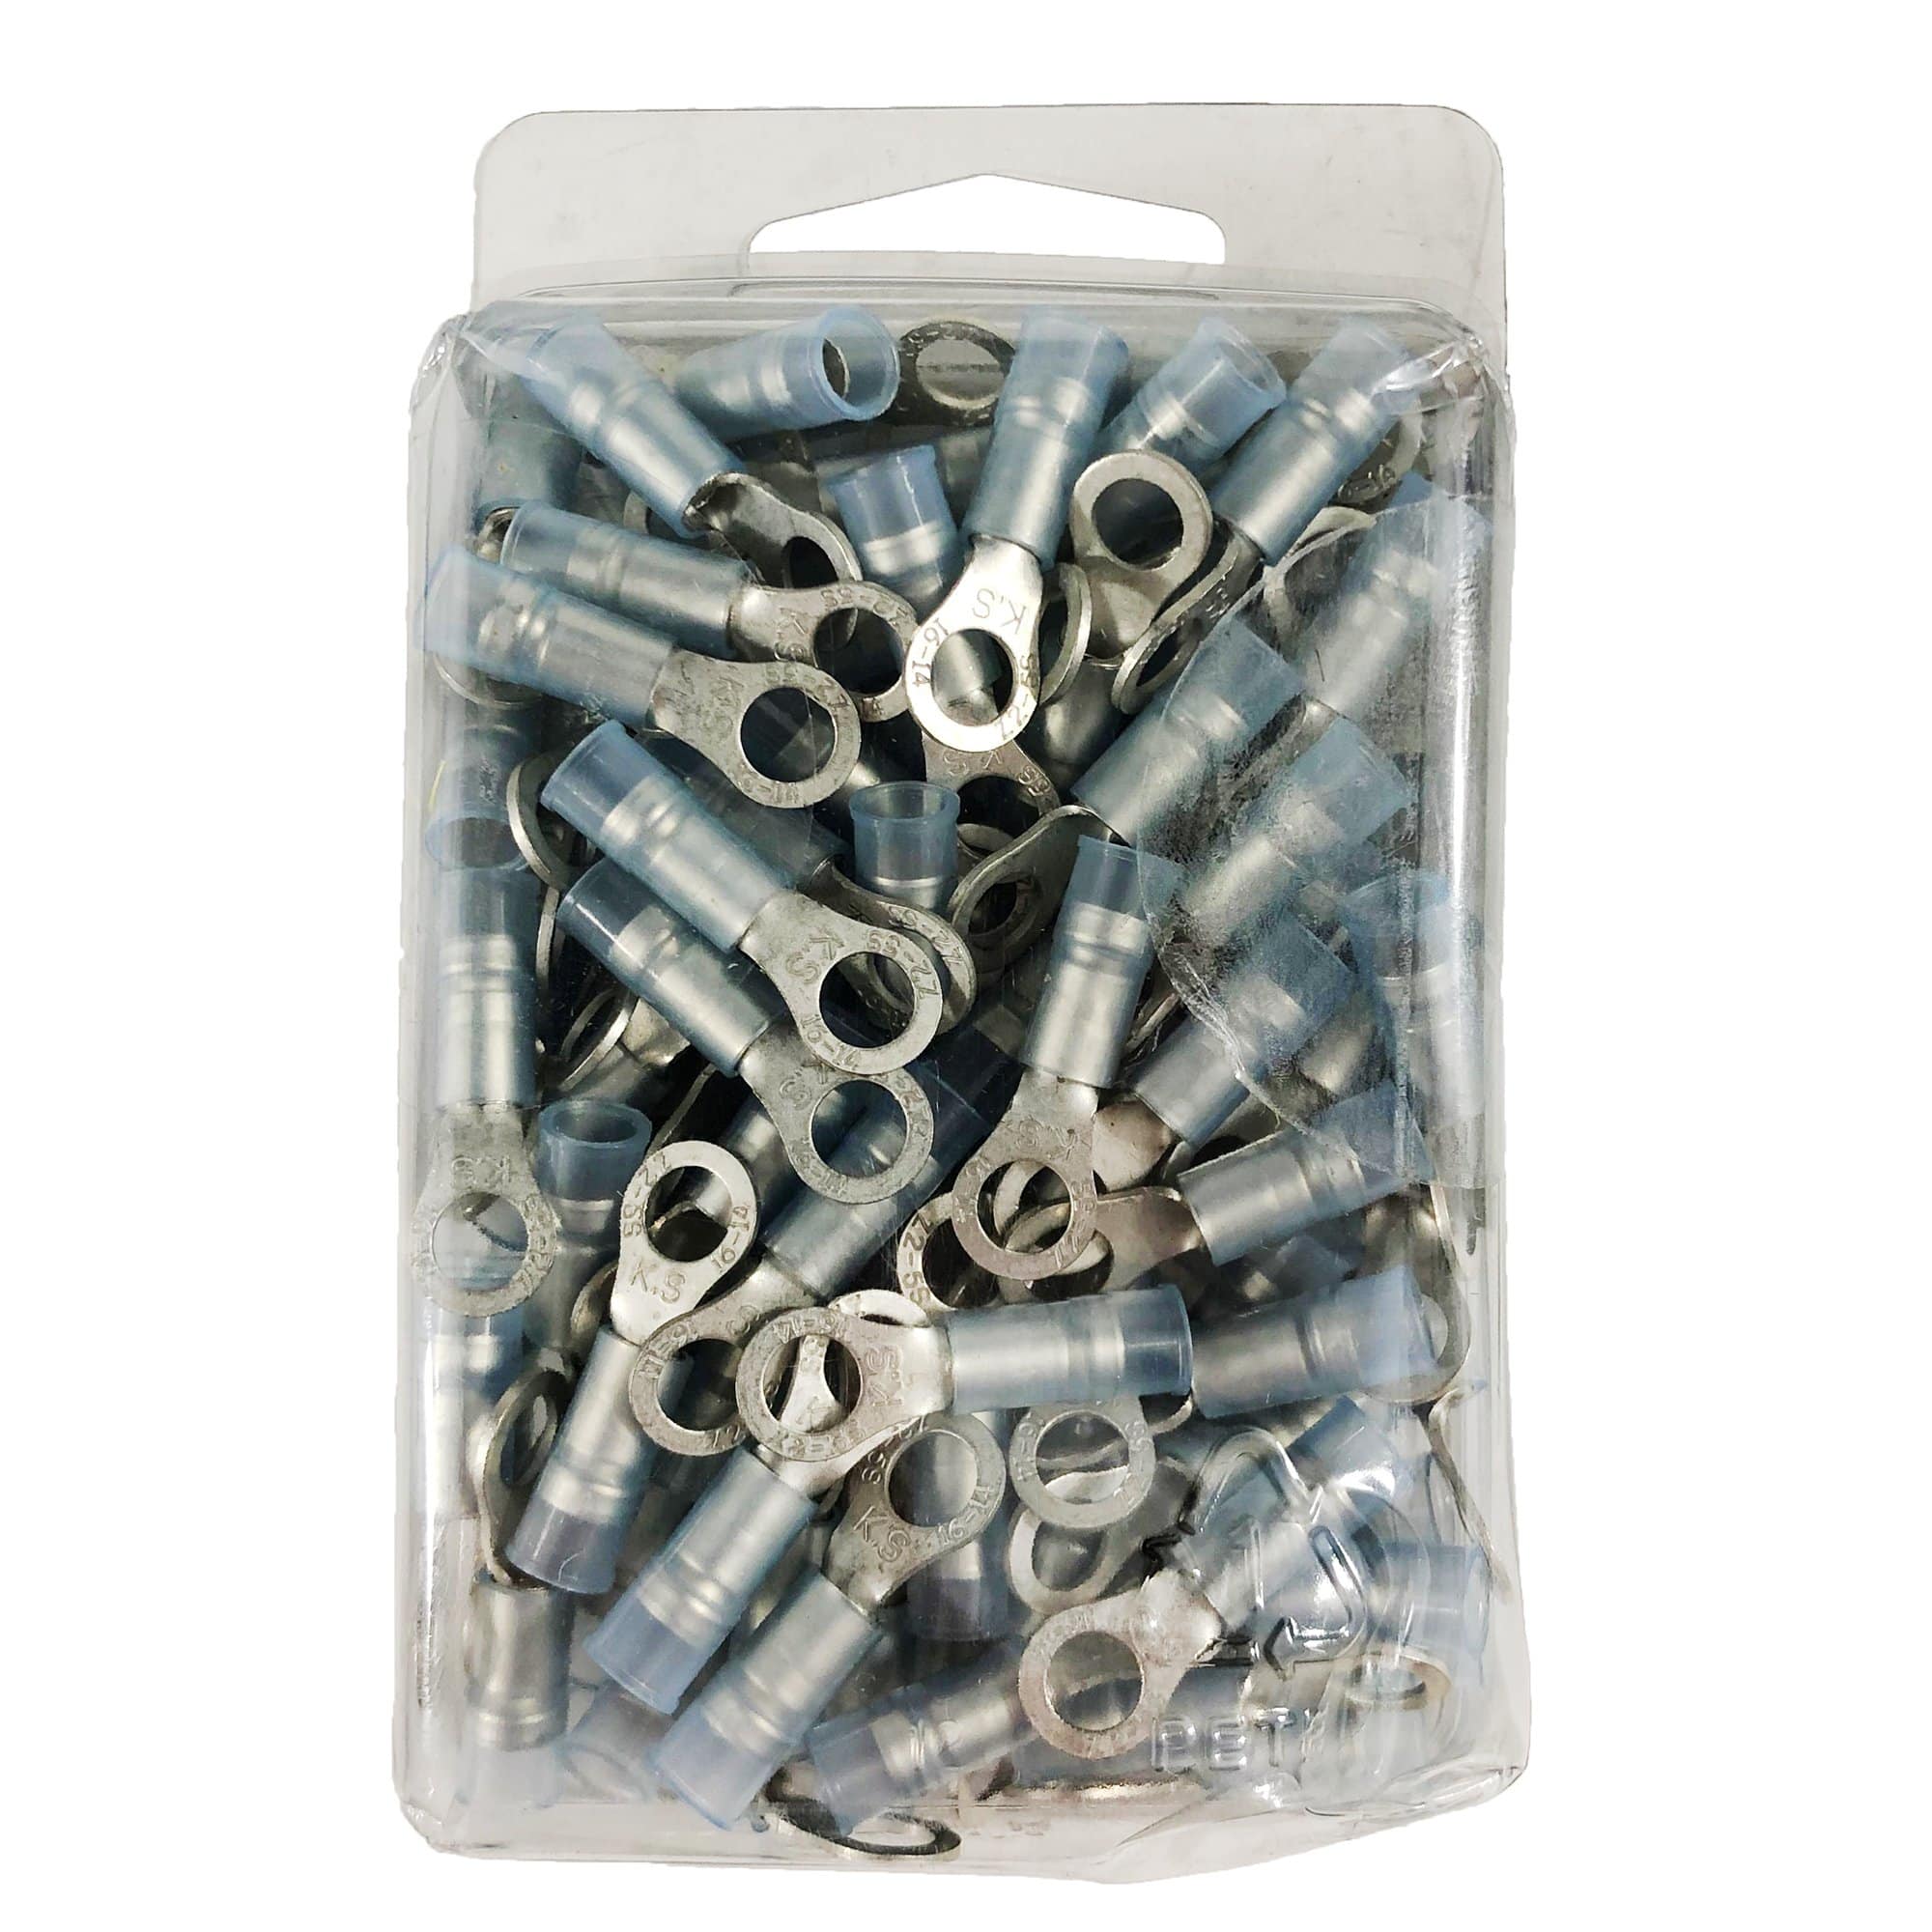 Ancor 220213 Power Products Nylon Ring Terminal, 16-14 #10, 100pc